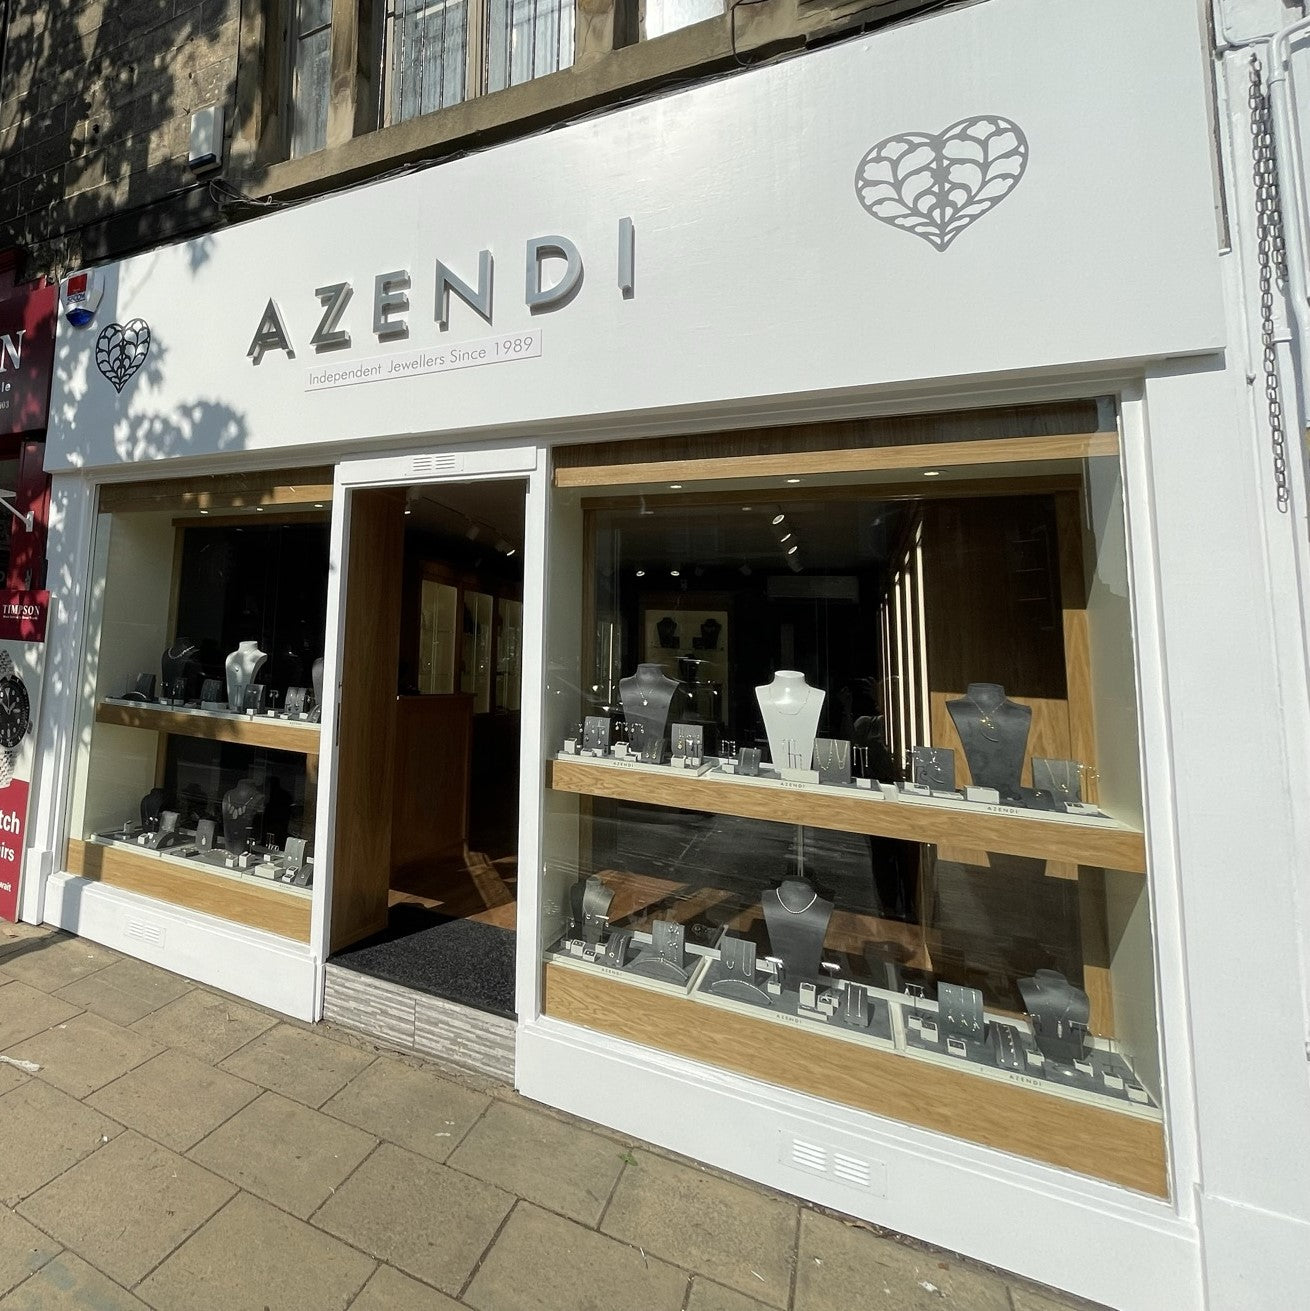 Our Seventh Store is now Open in Ilkley